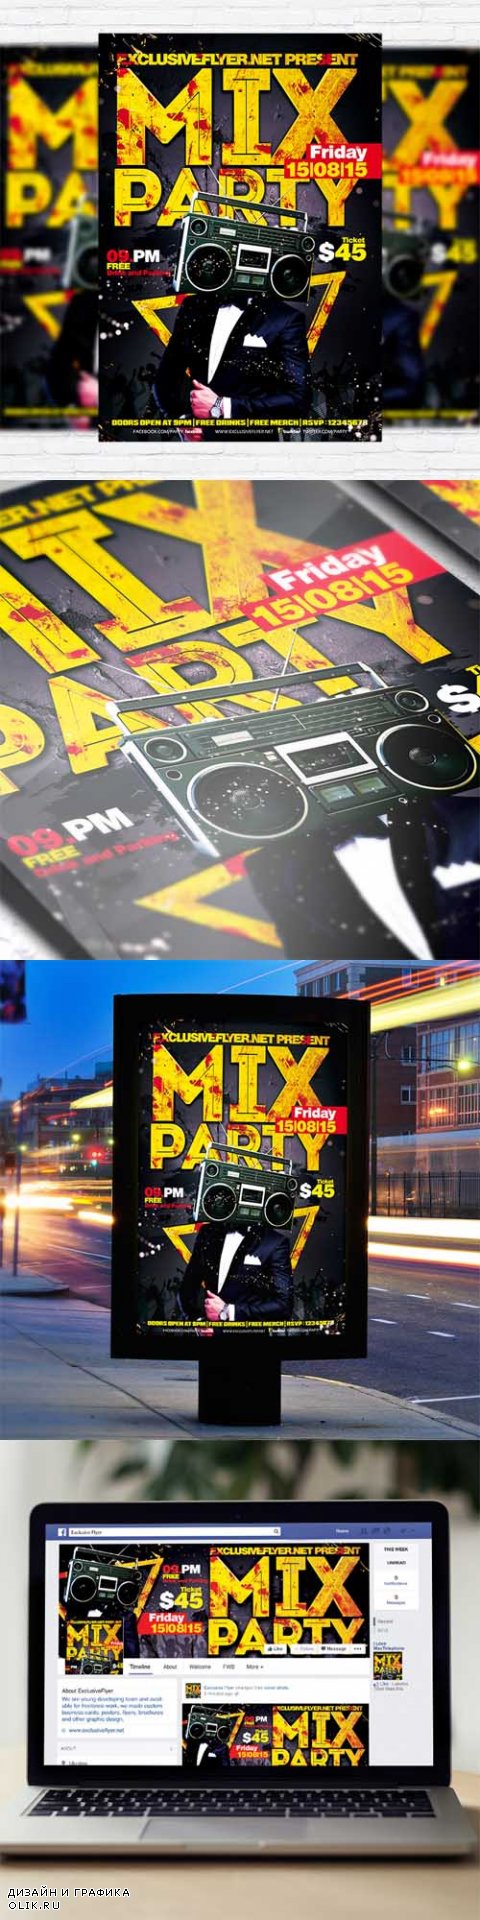 Flyer Template - Mix Party + Facebook Cover